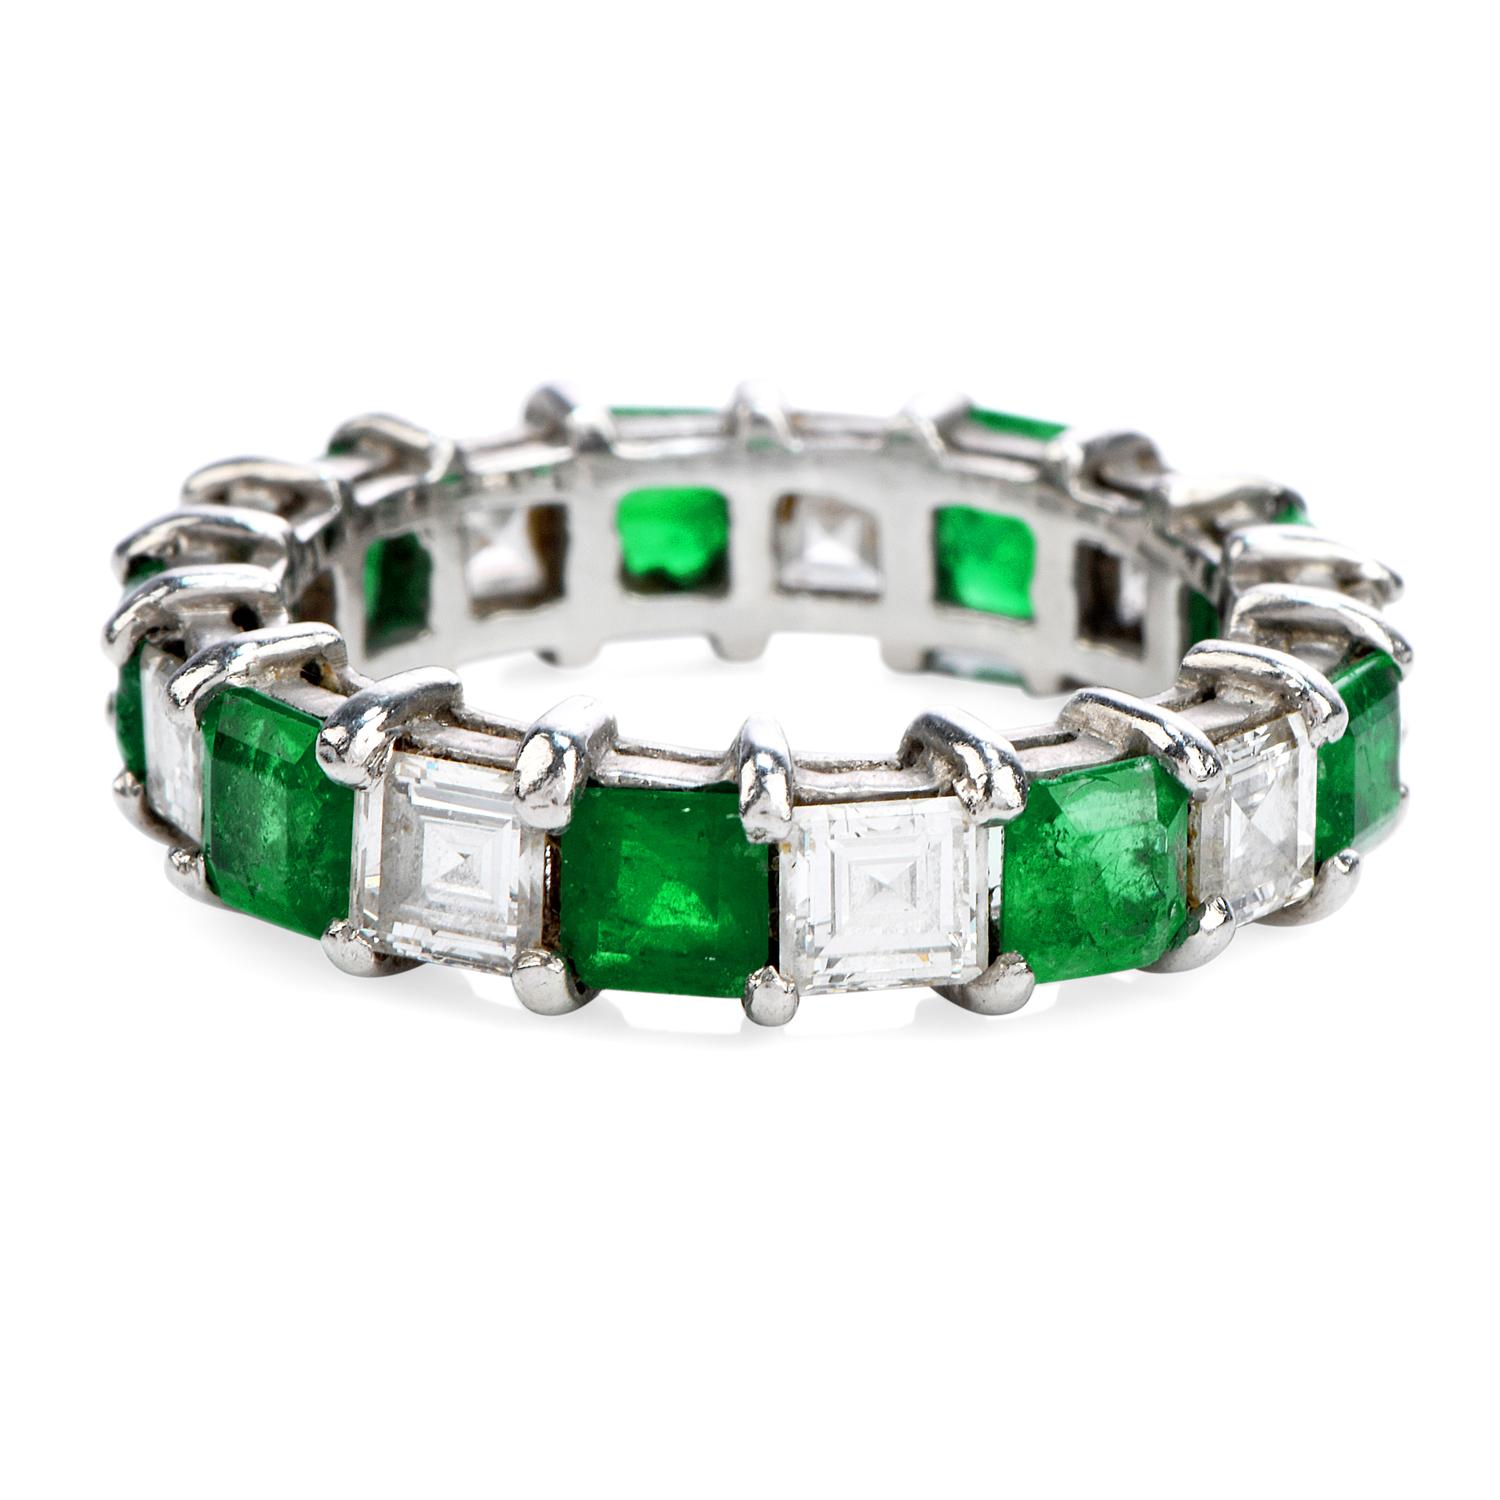 A celebration of beauty and endless sparkle! Finely crafted in solid platinum, this eternity band feature 9 genuine emerald cut emeralds approx. 2.06 carats and 9 asscher-cut diamond approx. 1.45 carats F-G color VS1 clarity. This remarkable band